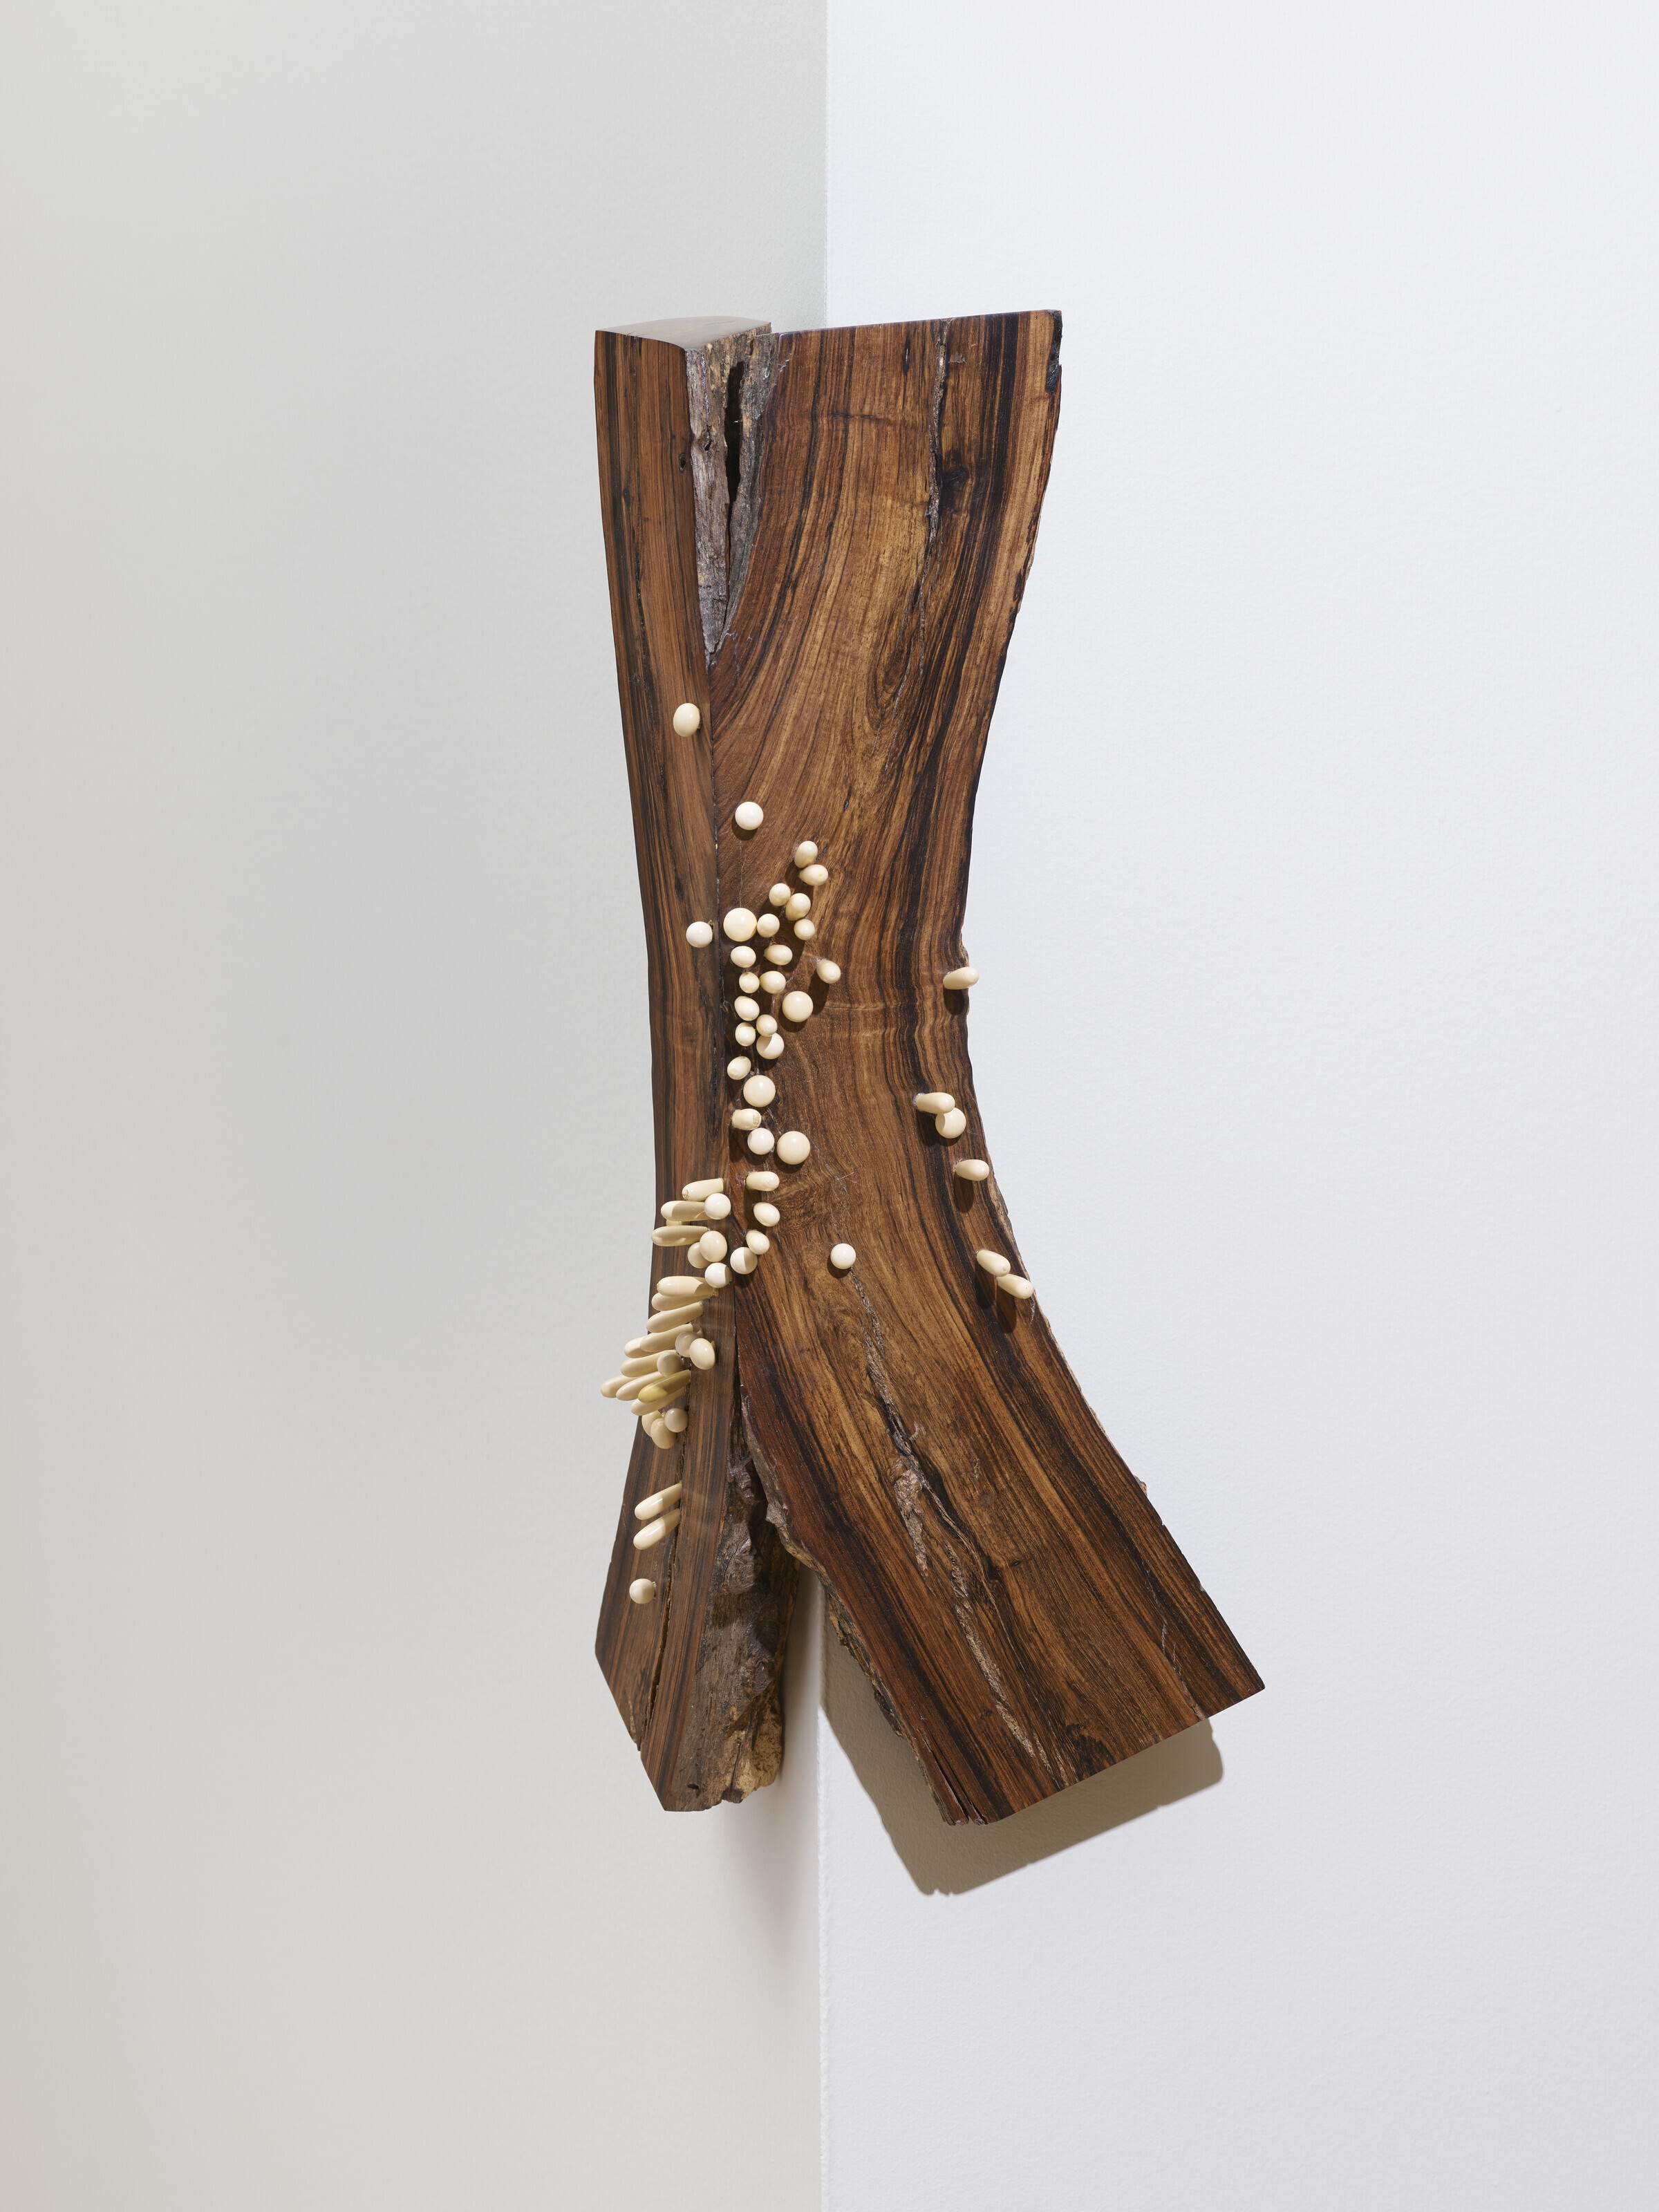 Artwork by Ranjani Shettar, Remenence from Last Night's Dream, Made of rosewood and lacquered wood